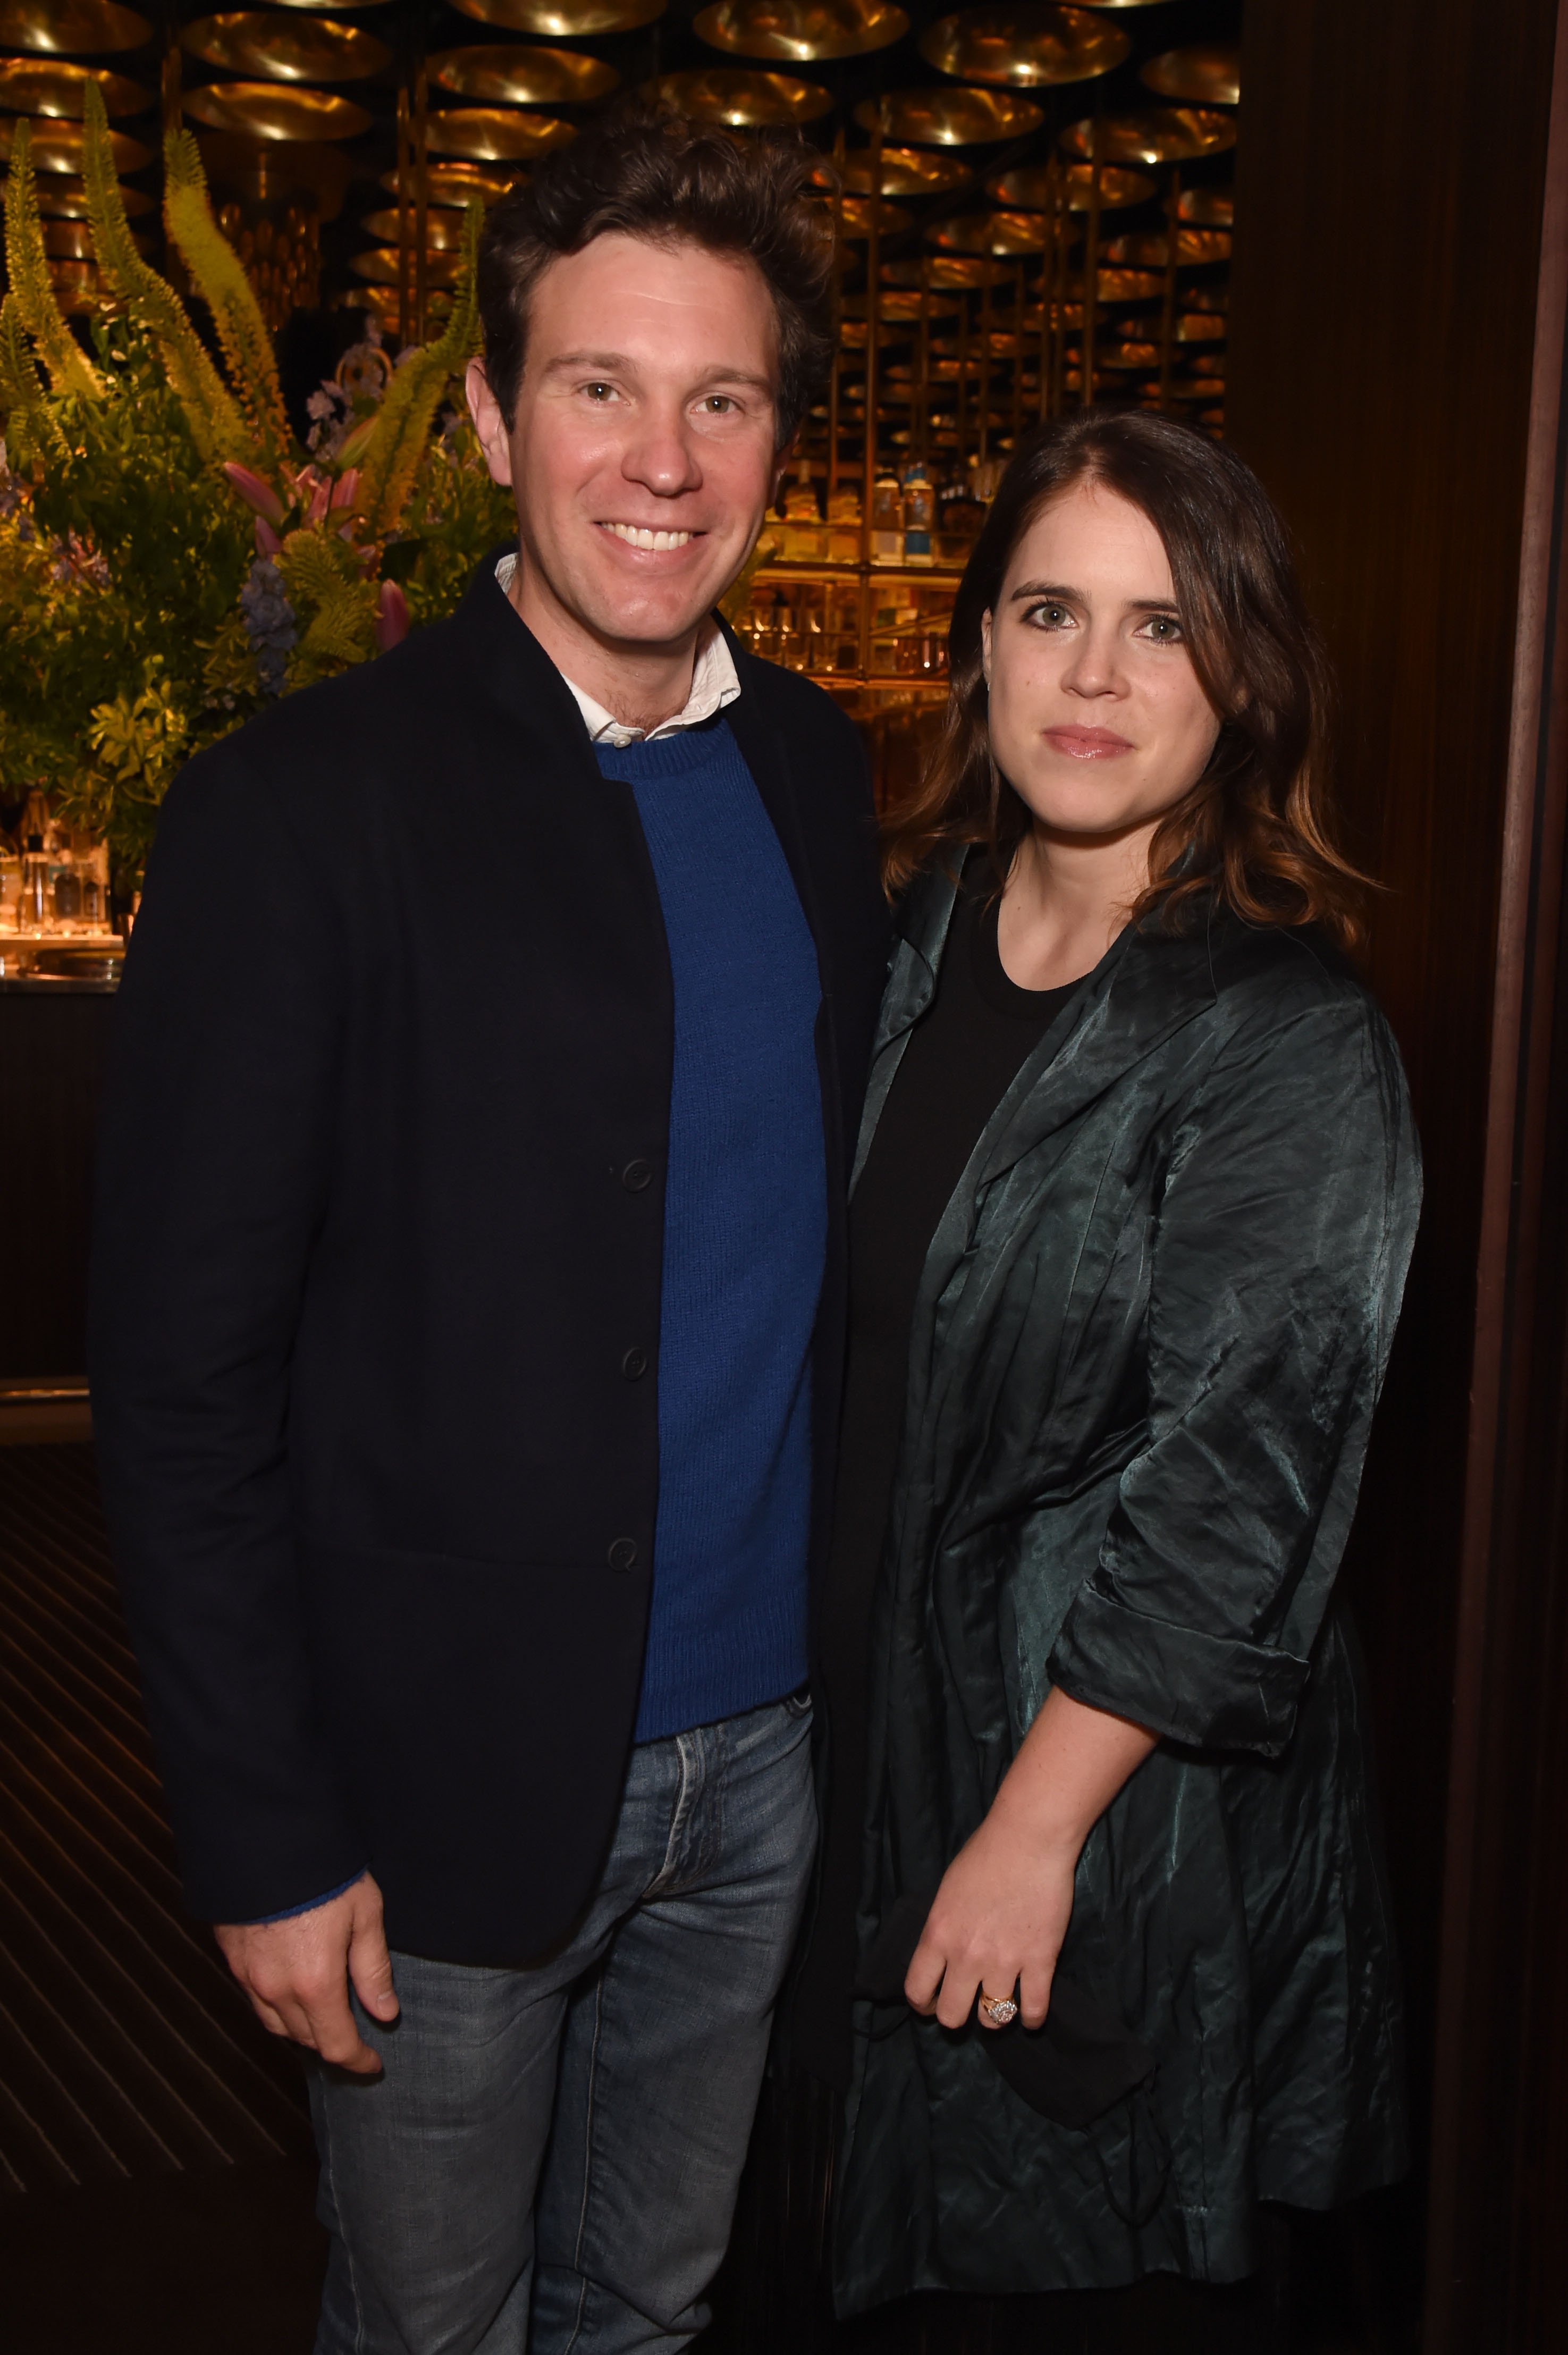 Jack Brooksbank and Princess Eugenie at the launch of Poppy Jamie's new book "Happy Not Perfect" at Isabel on June 22, 2021 in London, England. | Source: Getty Images